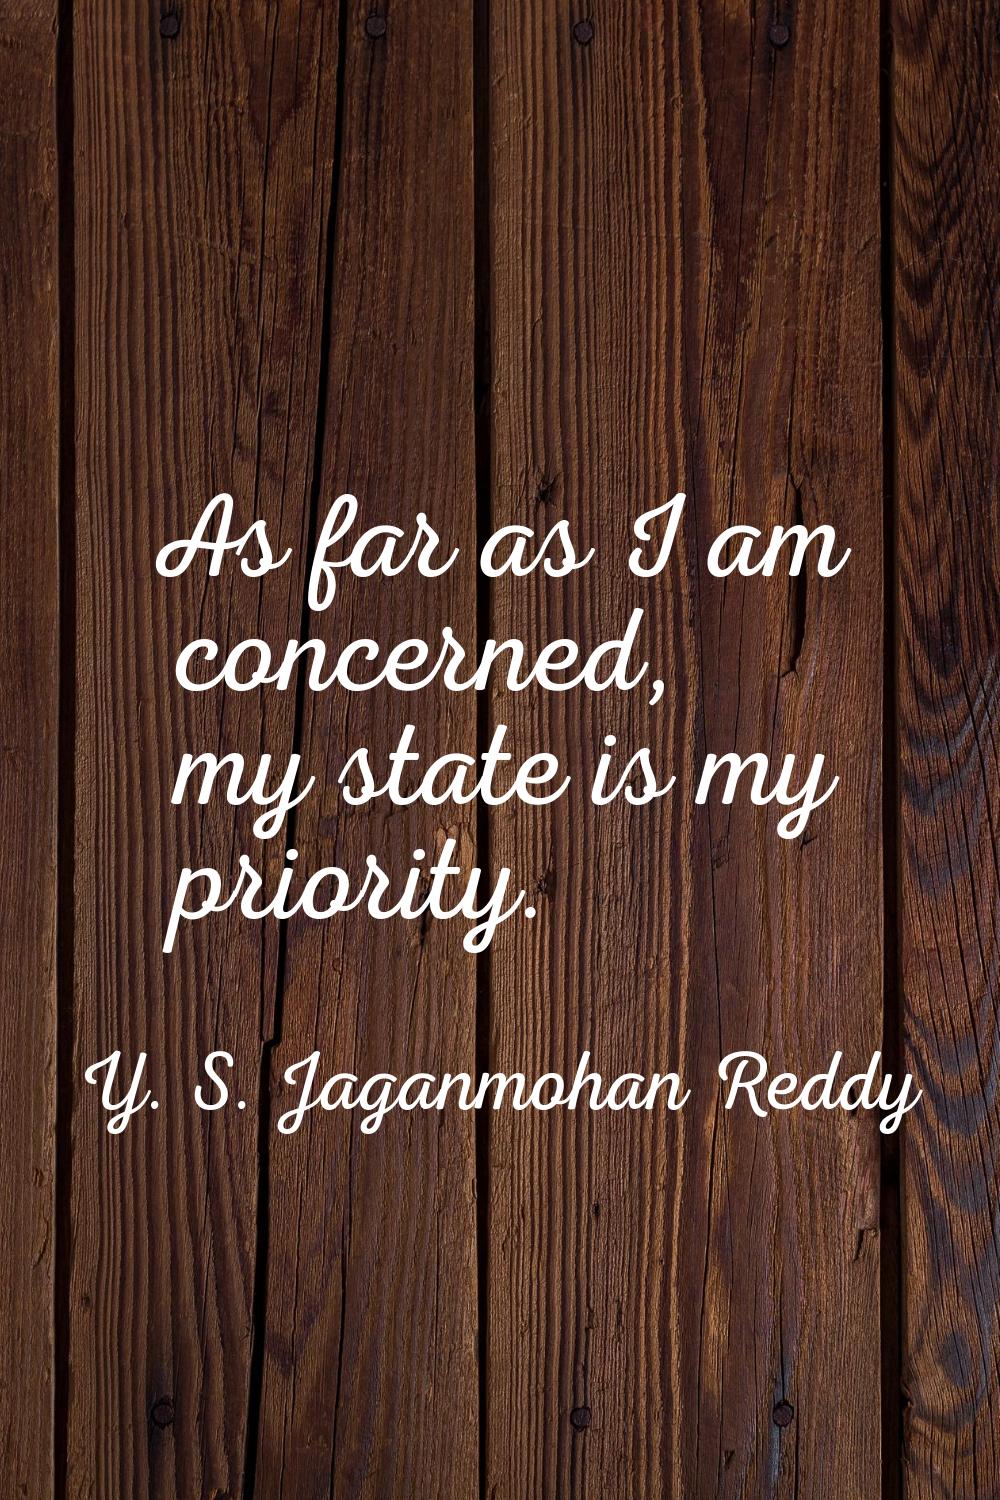 As far as I am concerned, my state is my priority.